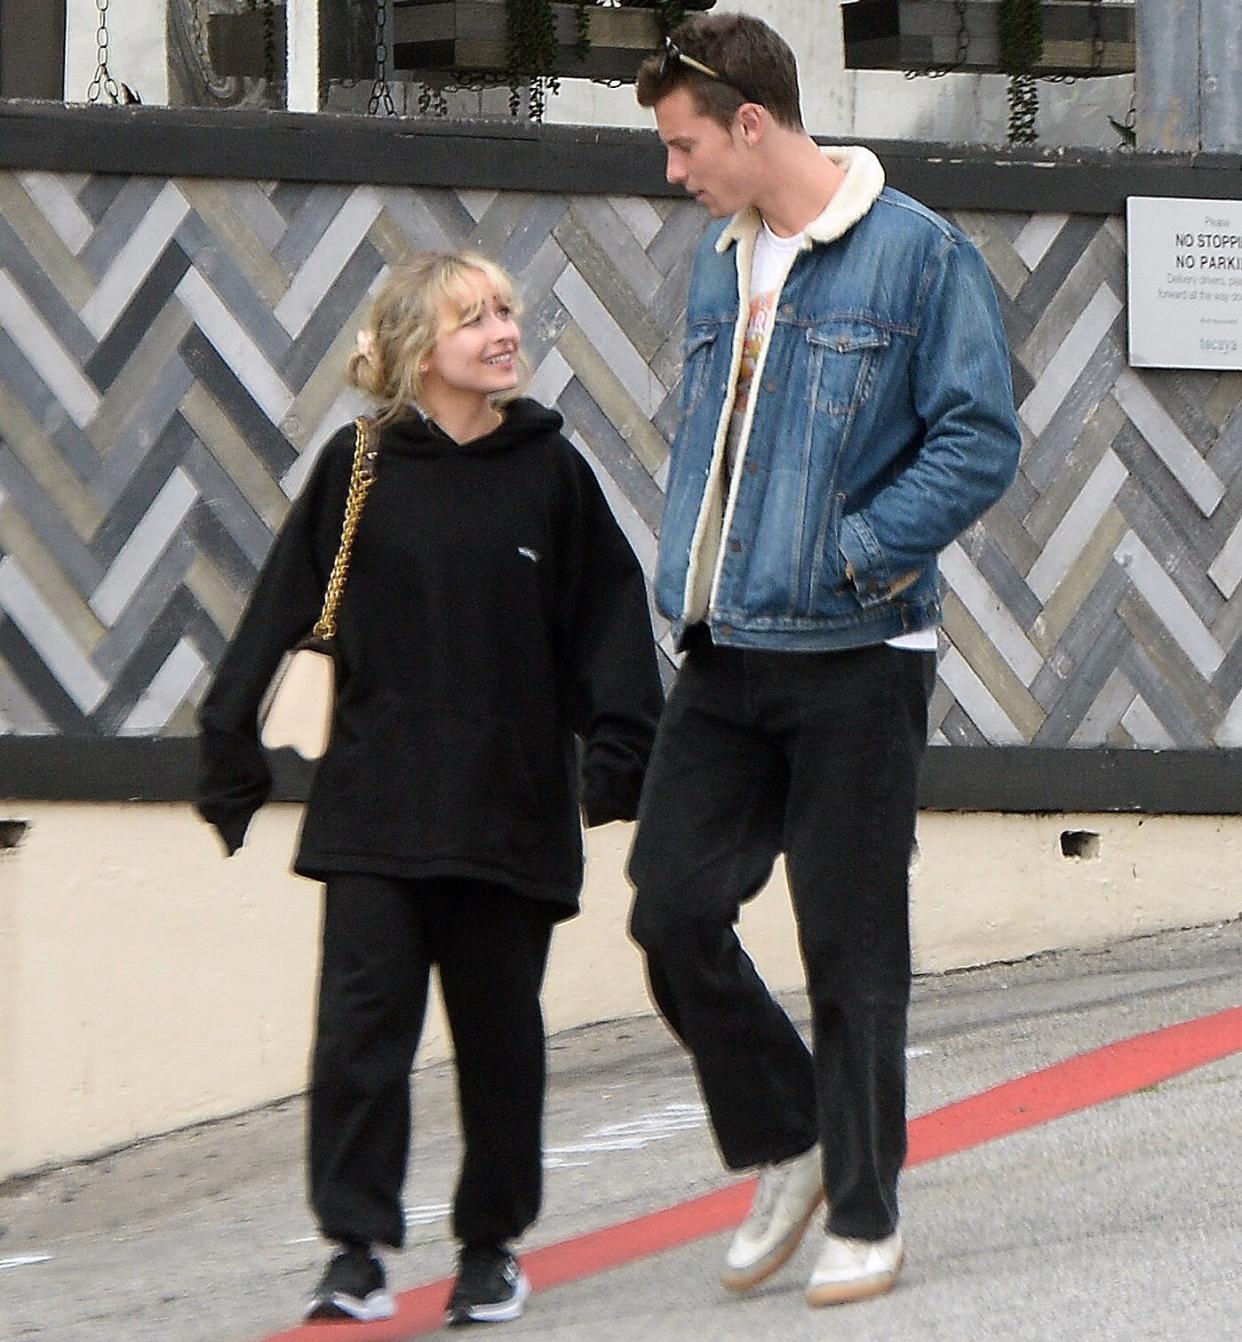 02/26/2023 EXCLUSIVE: Shawn Mendes and Sabrina Carpenter step out amid dating rumors in Los Angeles. The 23 year old singer was all smiles while wearing an oversized black hoodie, matching joggers and trainers. Shawn, 24, sported a shearling lined denim jacket and black trousers. sales@theimagedirect.com Please byline:TheImageDirect.com *EXCLUSIVE PLEASE EMAIL sales@theimagedirect.com FOR FEES BEFORE USE